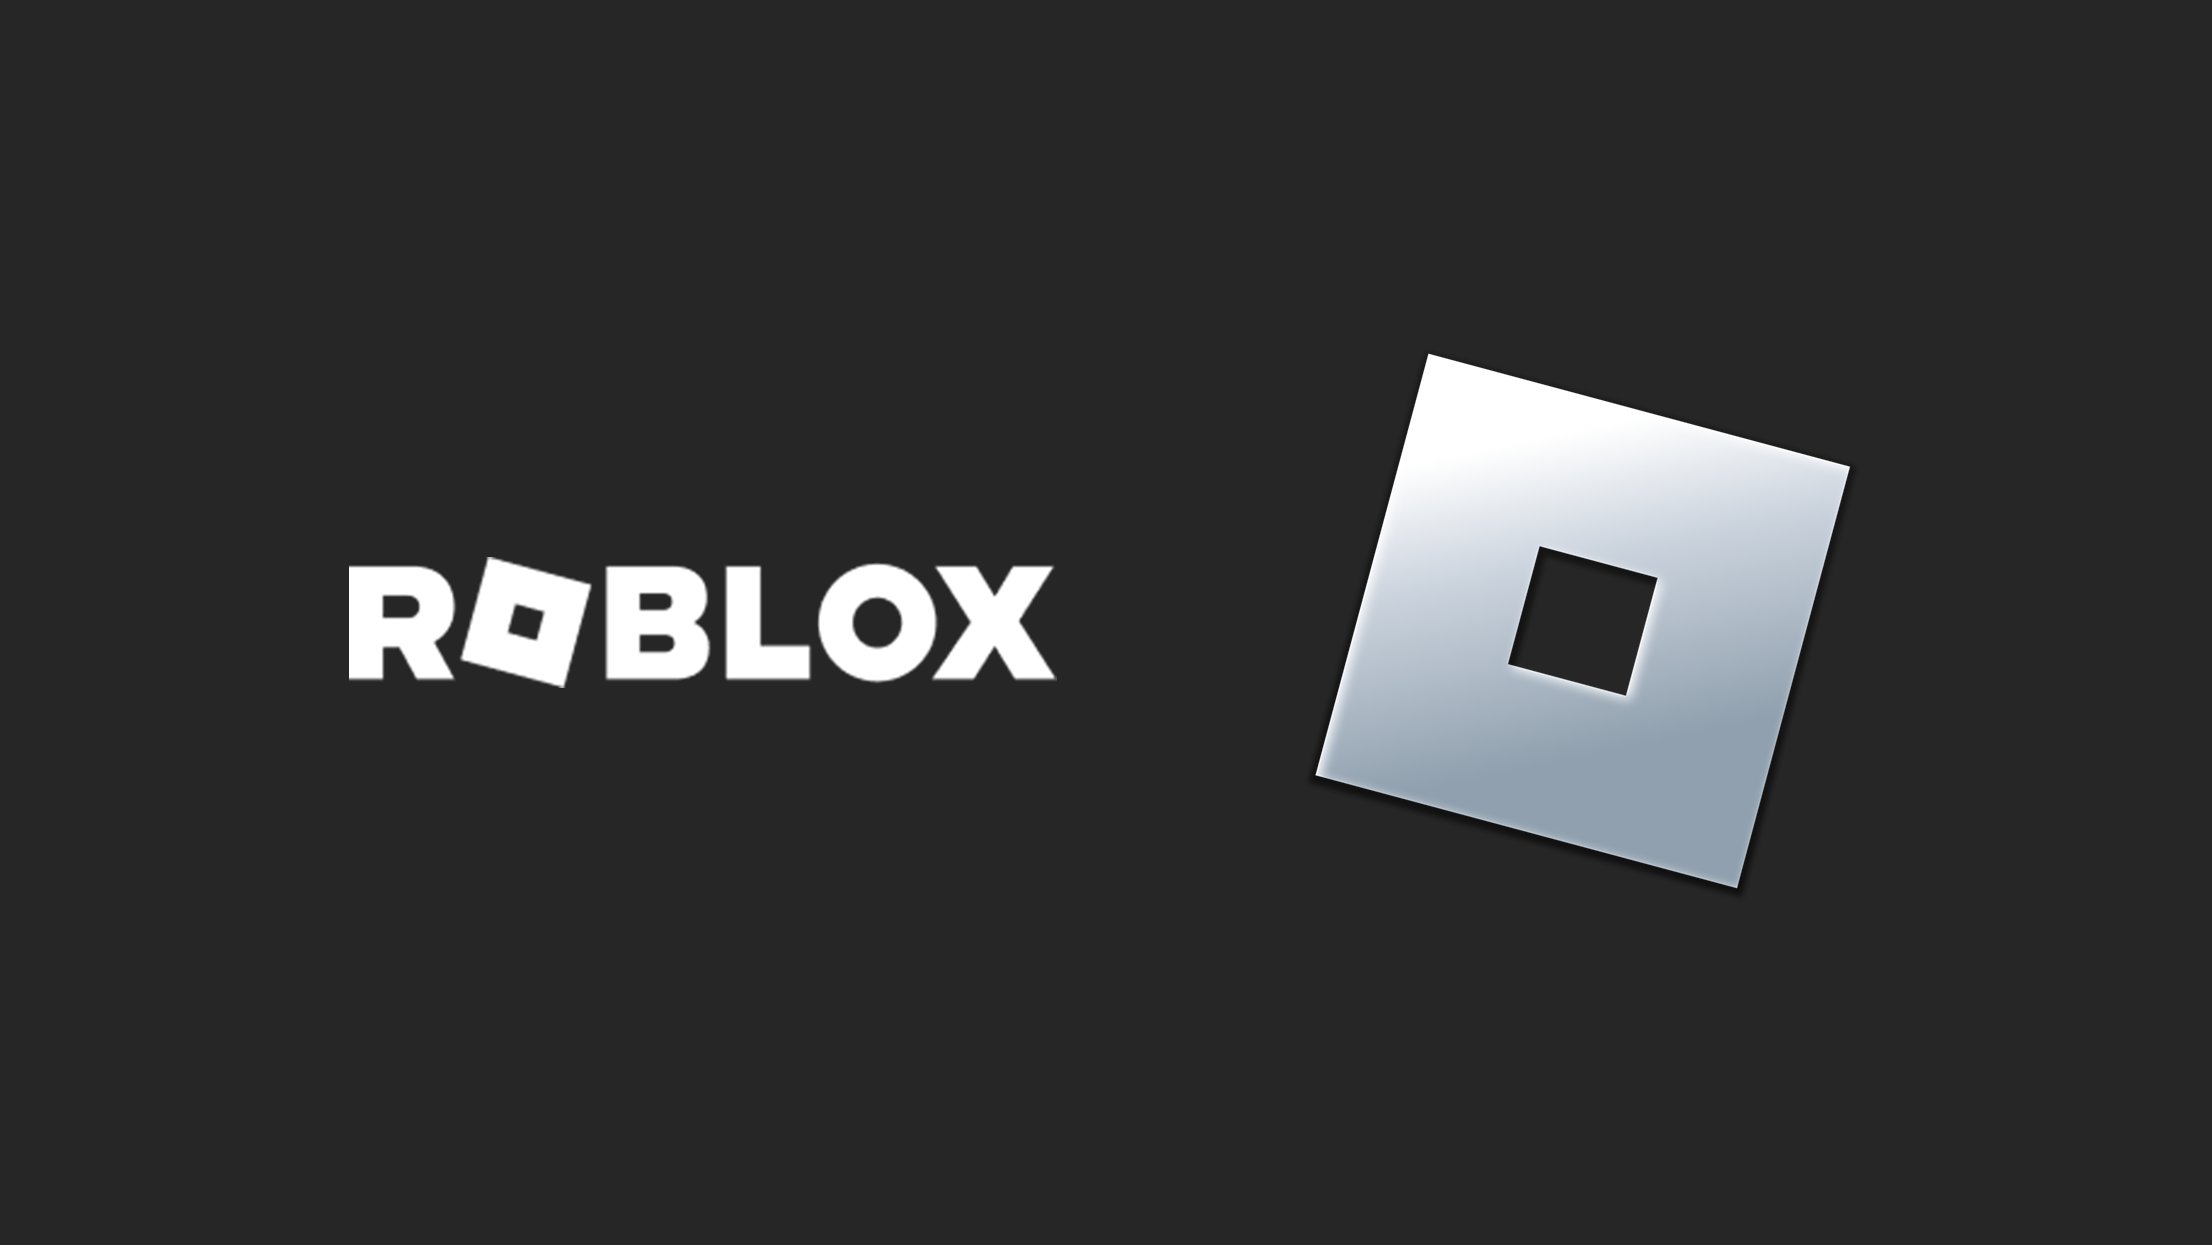 NEW Roblox Logo is CONFIRMED 